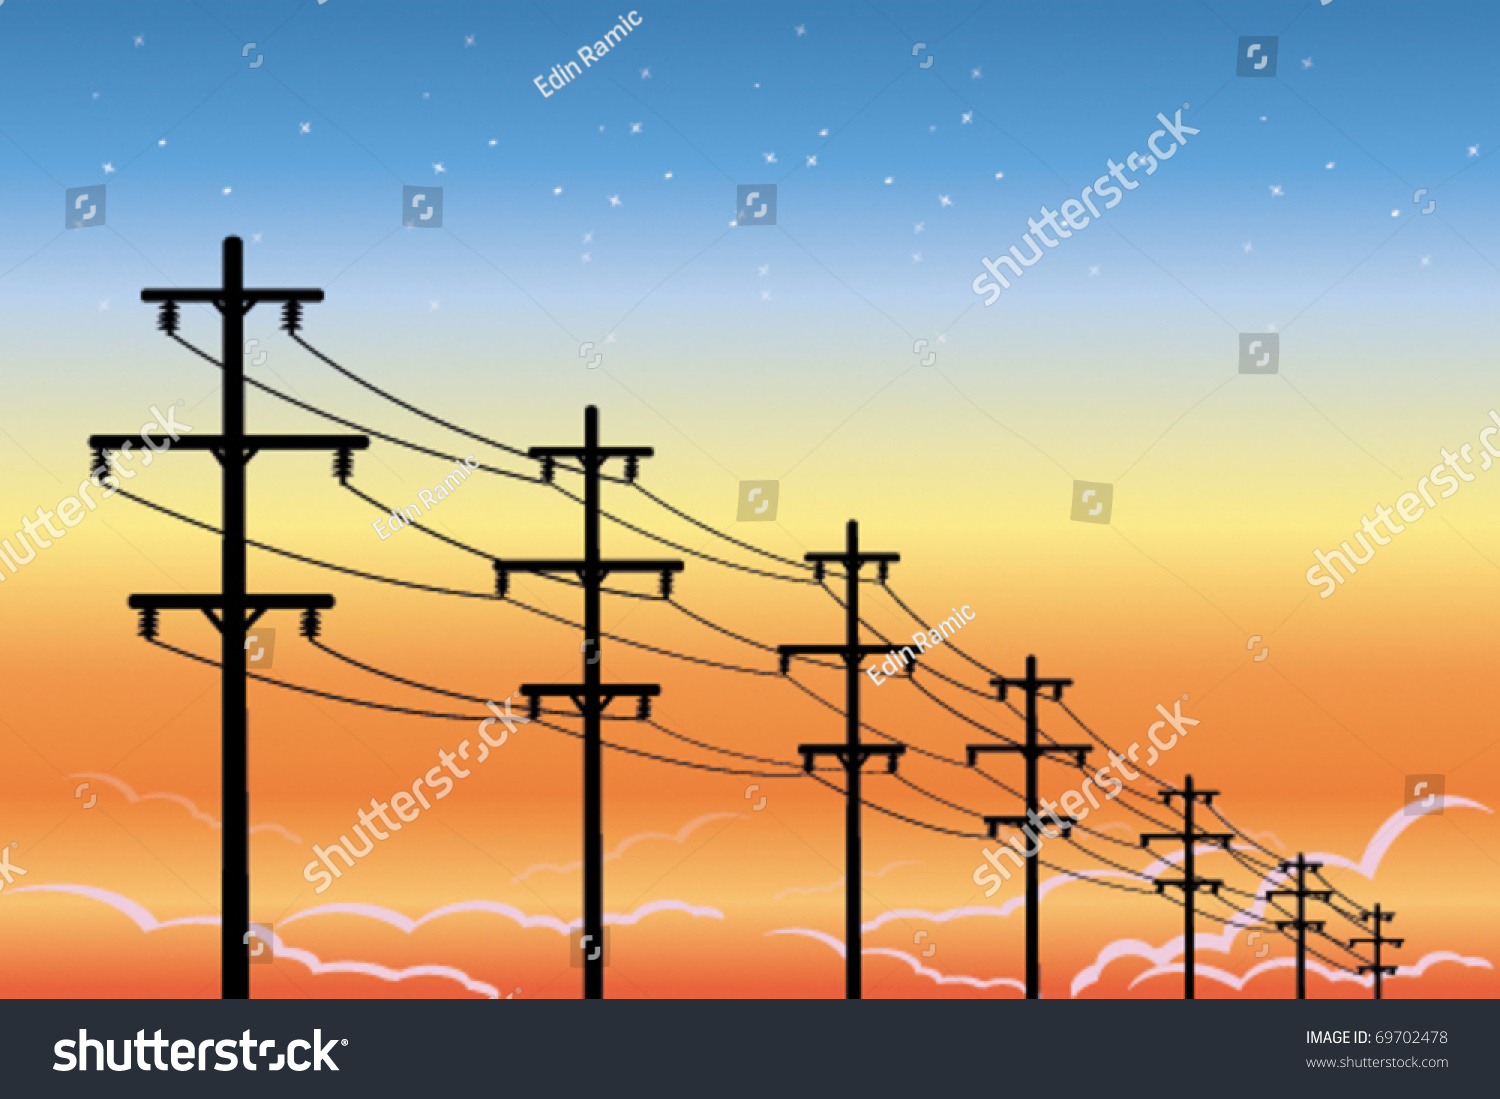 clipart power lines - photo #47